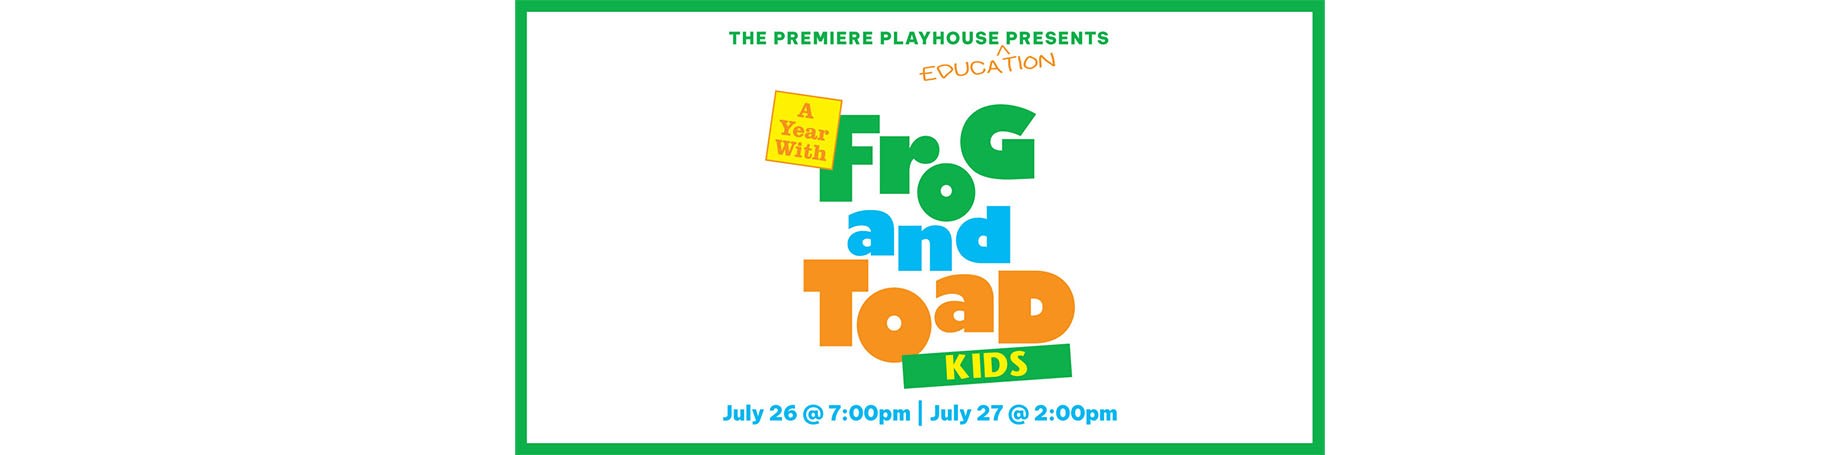 The Premiere Playhouse presents A Year with Frog & Toad